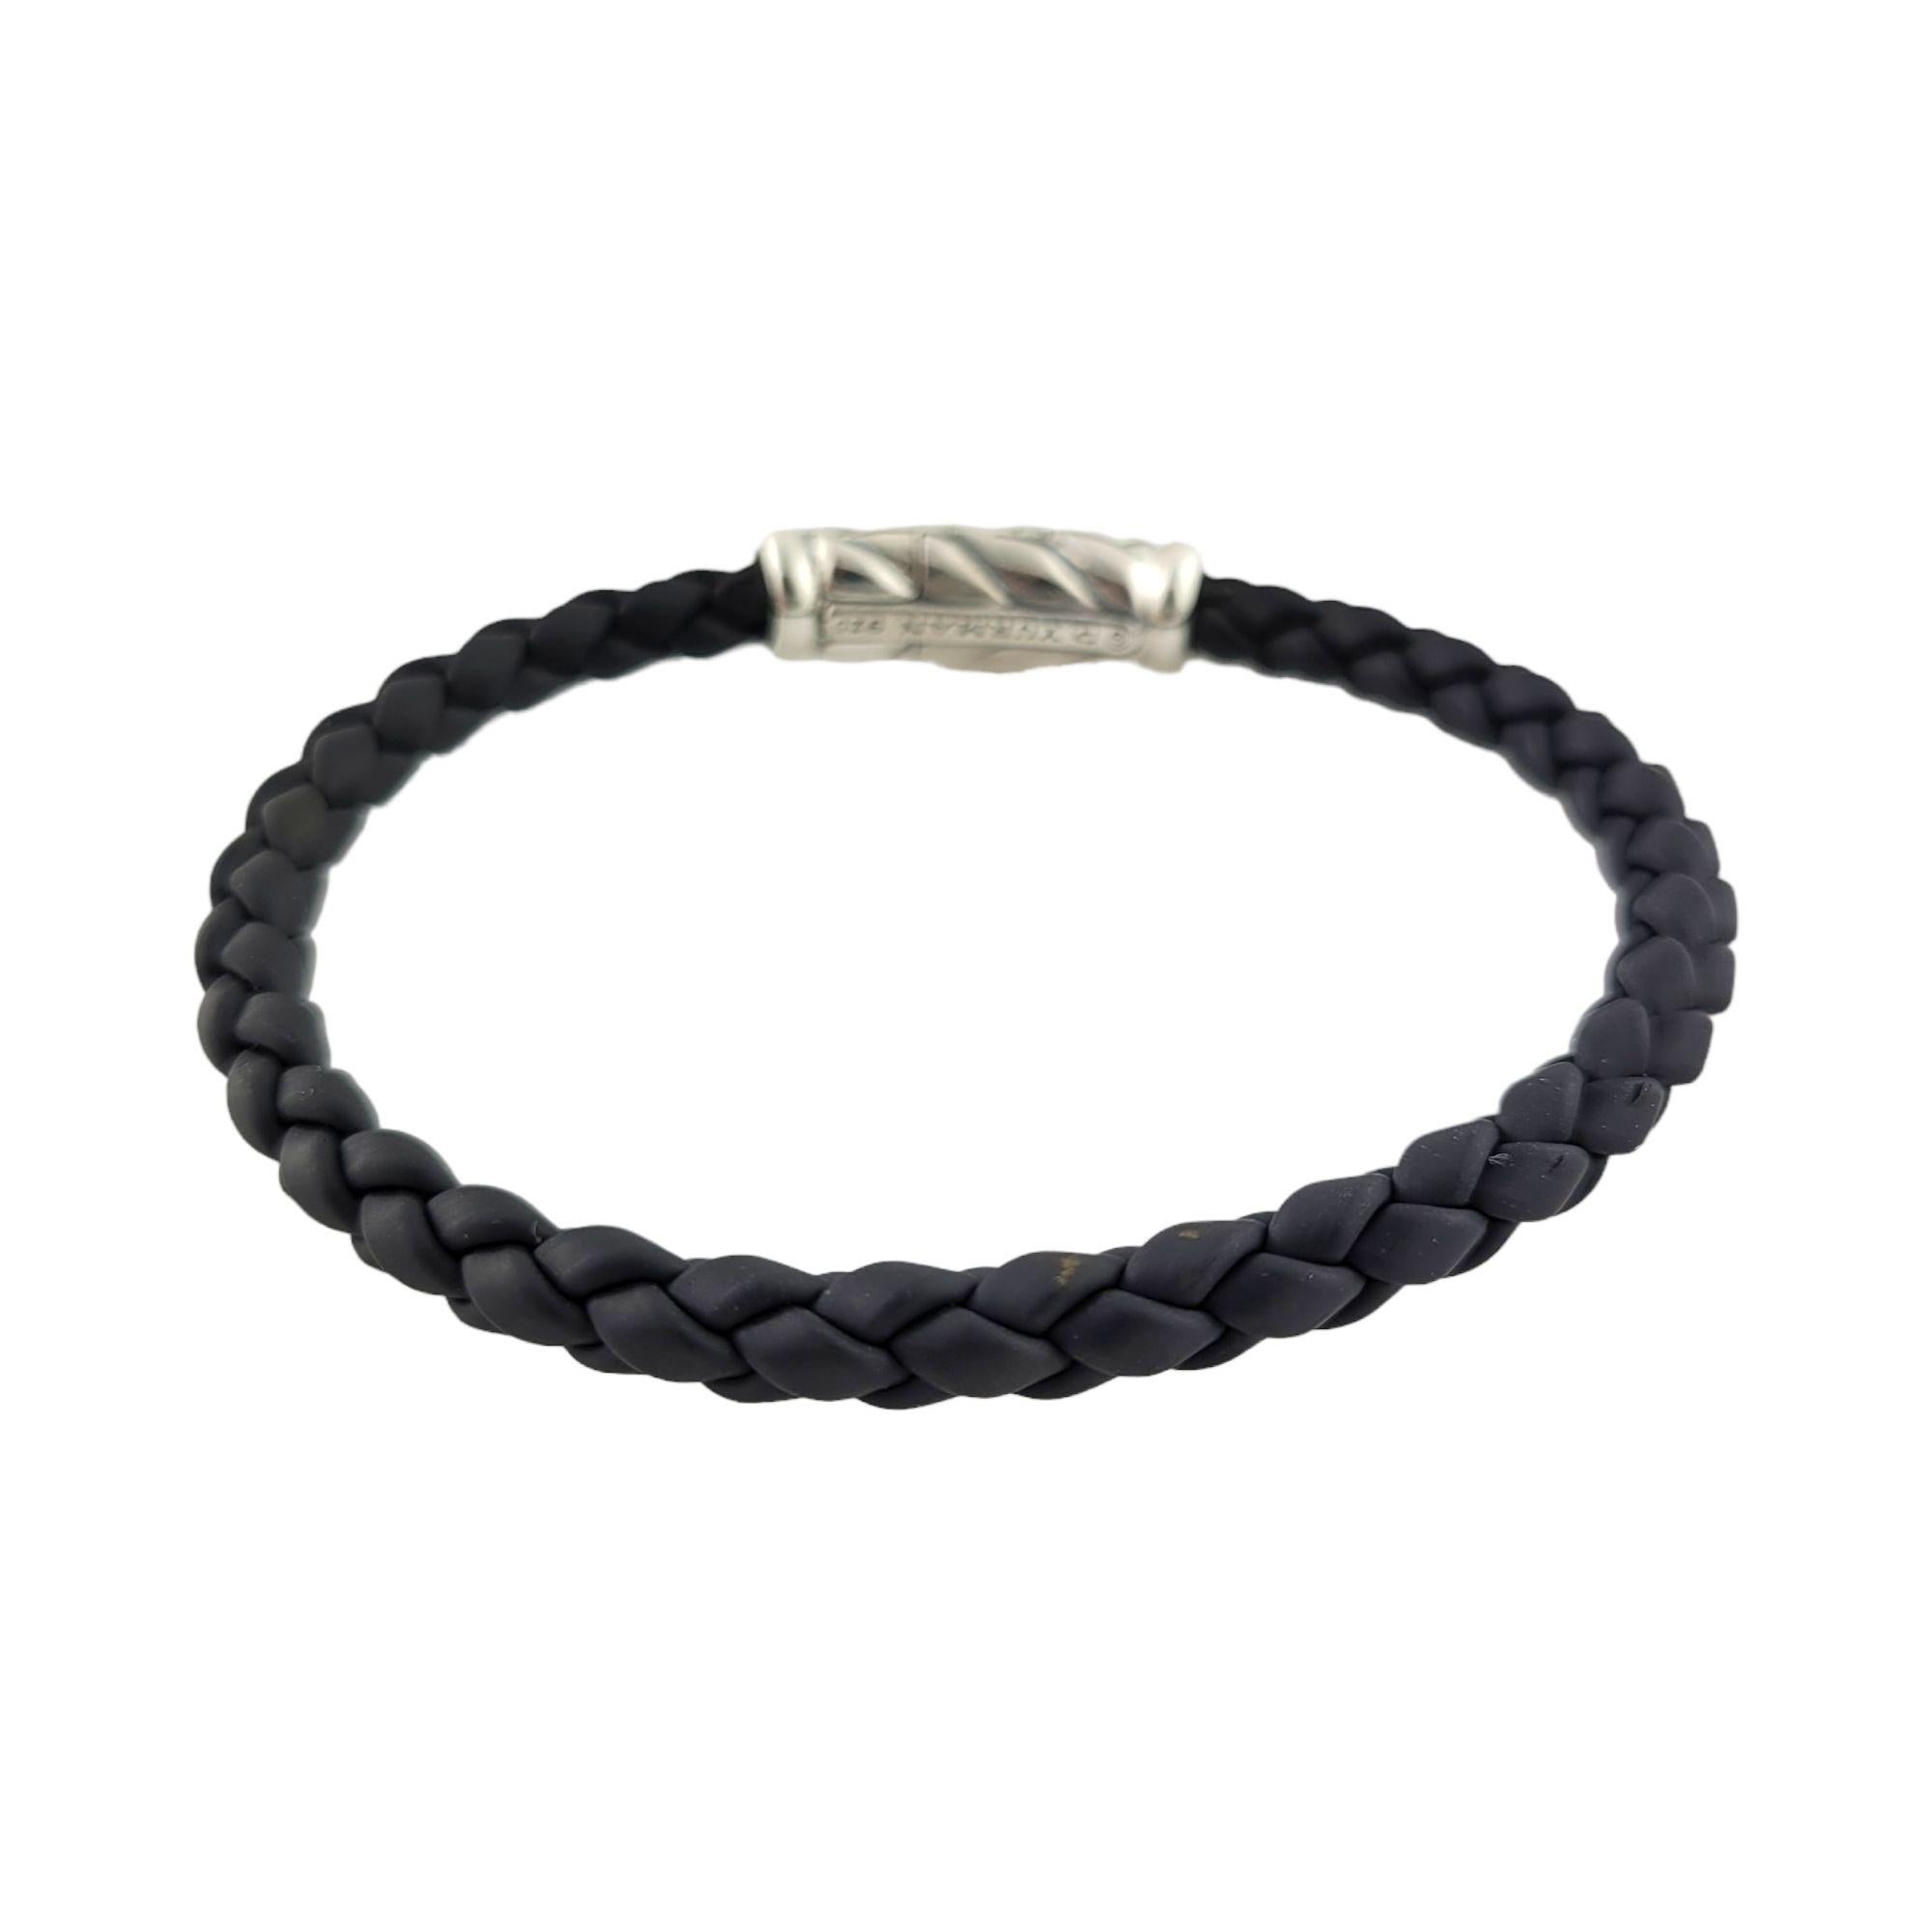 David Yurman Sterling Silver Black Braided Leather Cable Bracelet

This fashionable David Yurman bracelet features a braided leather strap with sterling silver magnetic closure with clasp in a cable design.

Bracelet fits up to approx. 7